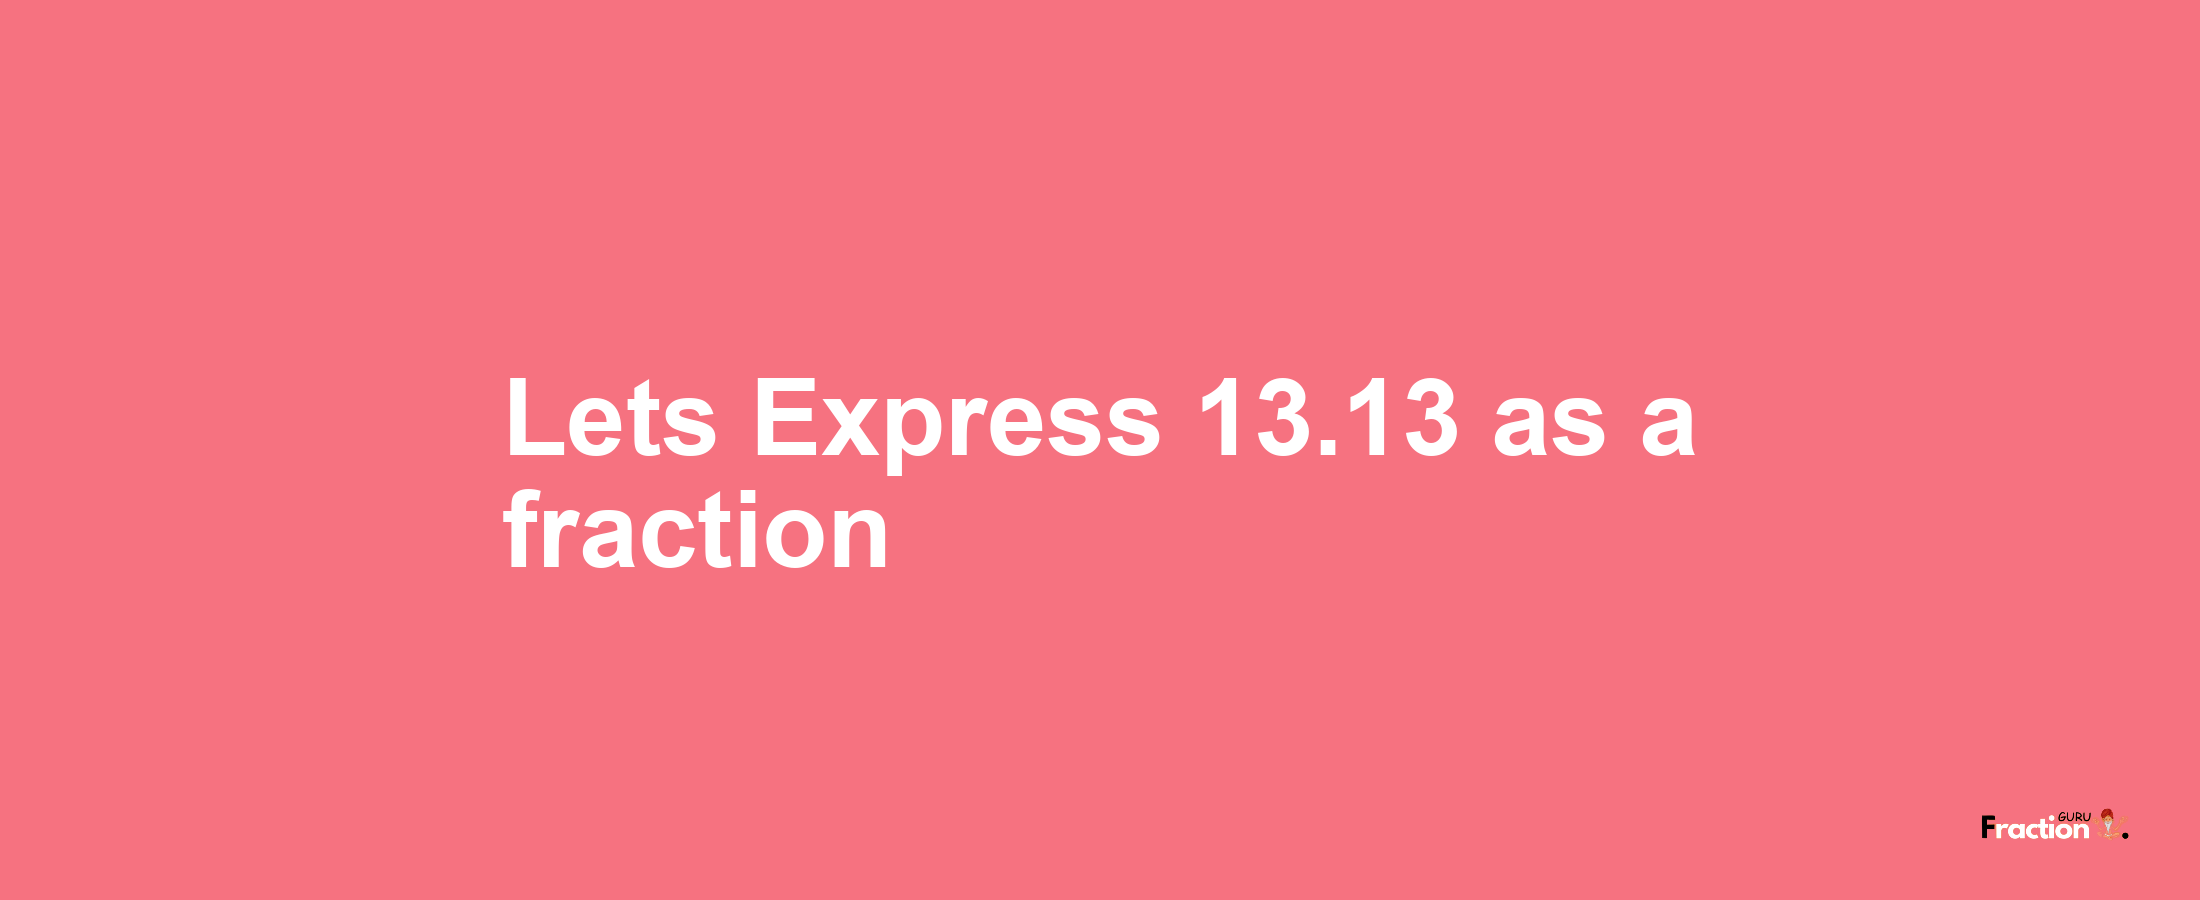 Lets Express 13.13 as afraction